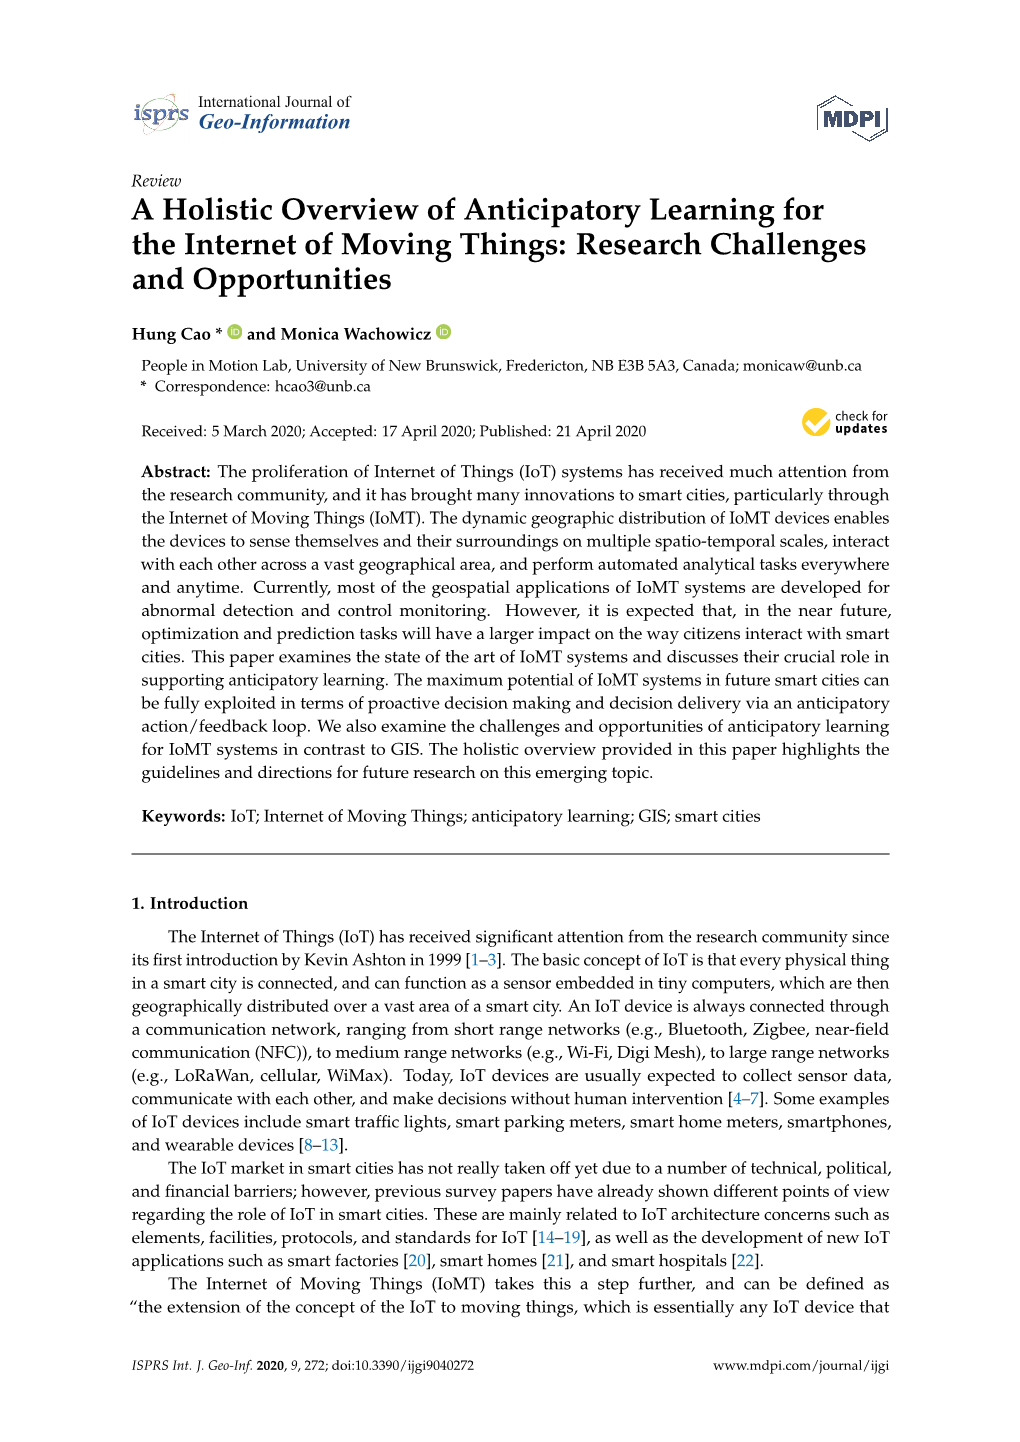 A Holistic Overview of Anticipatory Learning for the Internet of Moving Things: Research Challenges and Opportunities